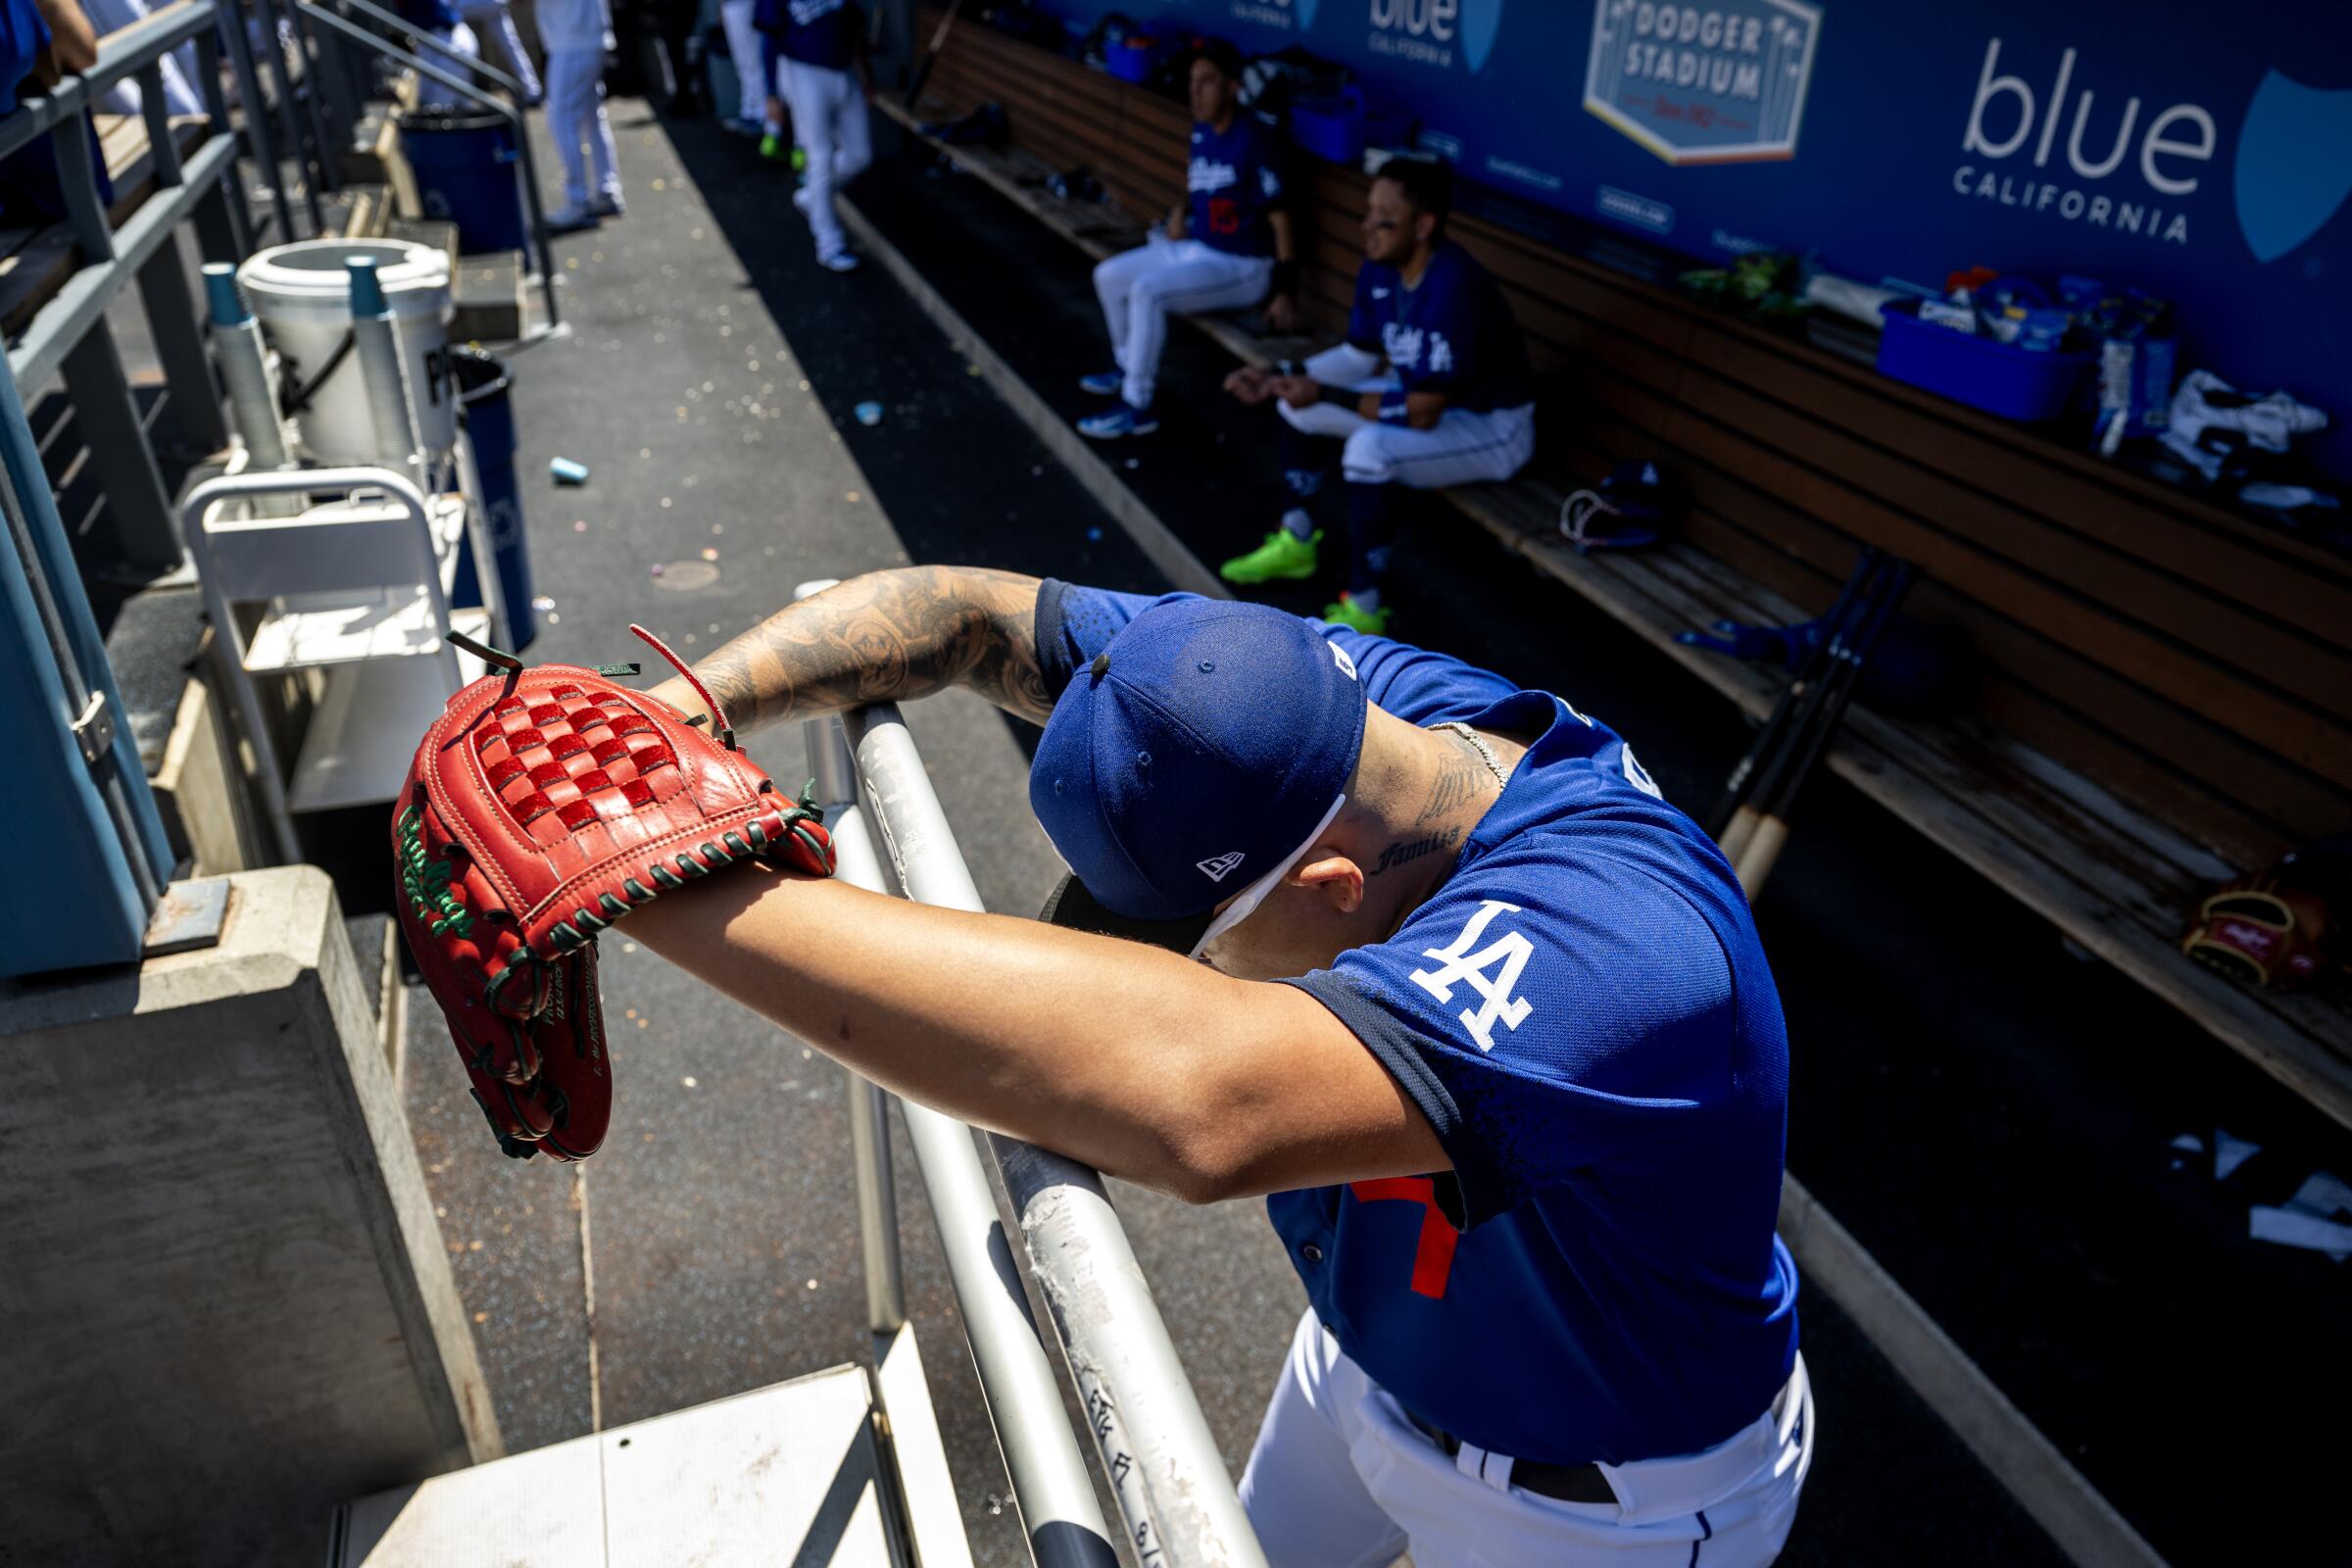 Dodgers starting pitcher Julio Urias stares down at the ground in the dugout during a game last month at Dodger Stadium.